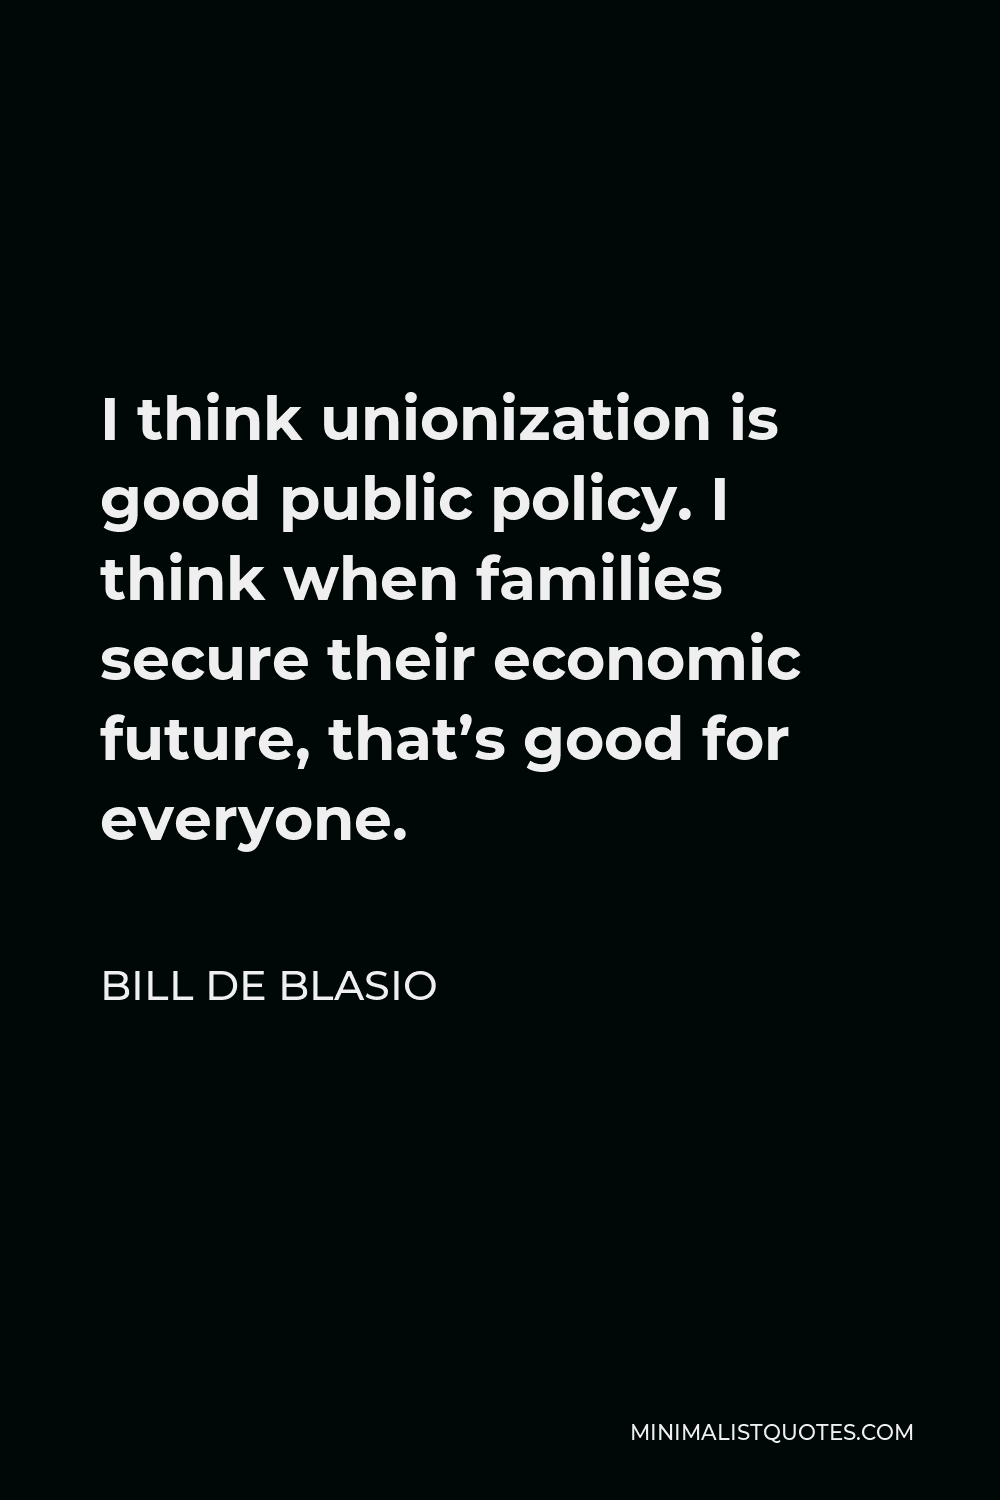 Bill de Blasio Quote - I think unionization is good public policy. I think when families secure their economic future, that’s good for everyone.